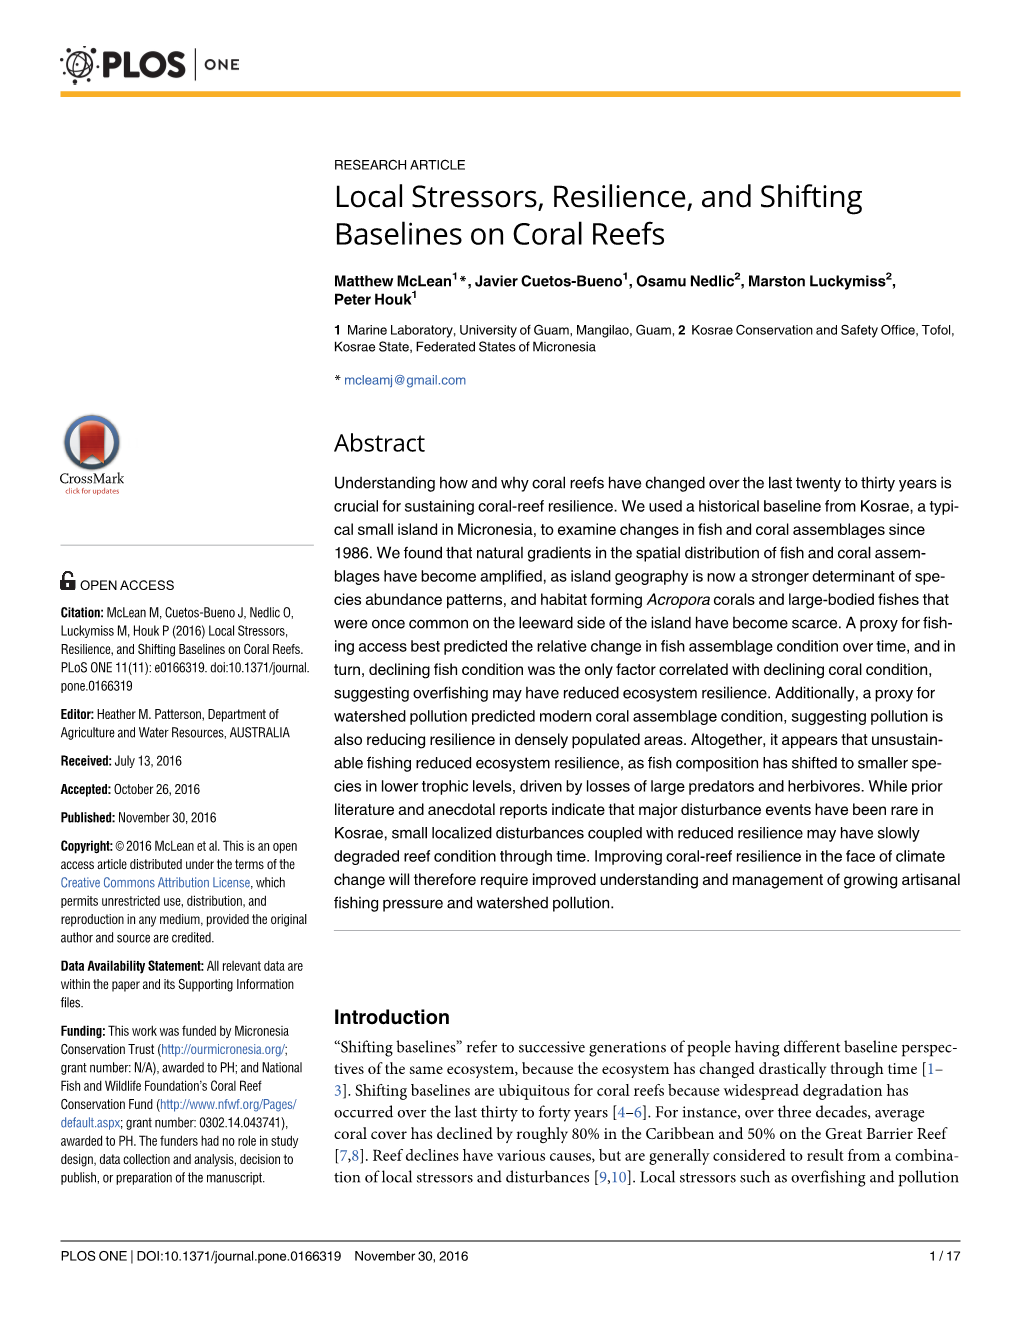 Local Stressors, Resilience, and Shifting Baselines on Coral Reefs